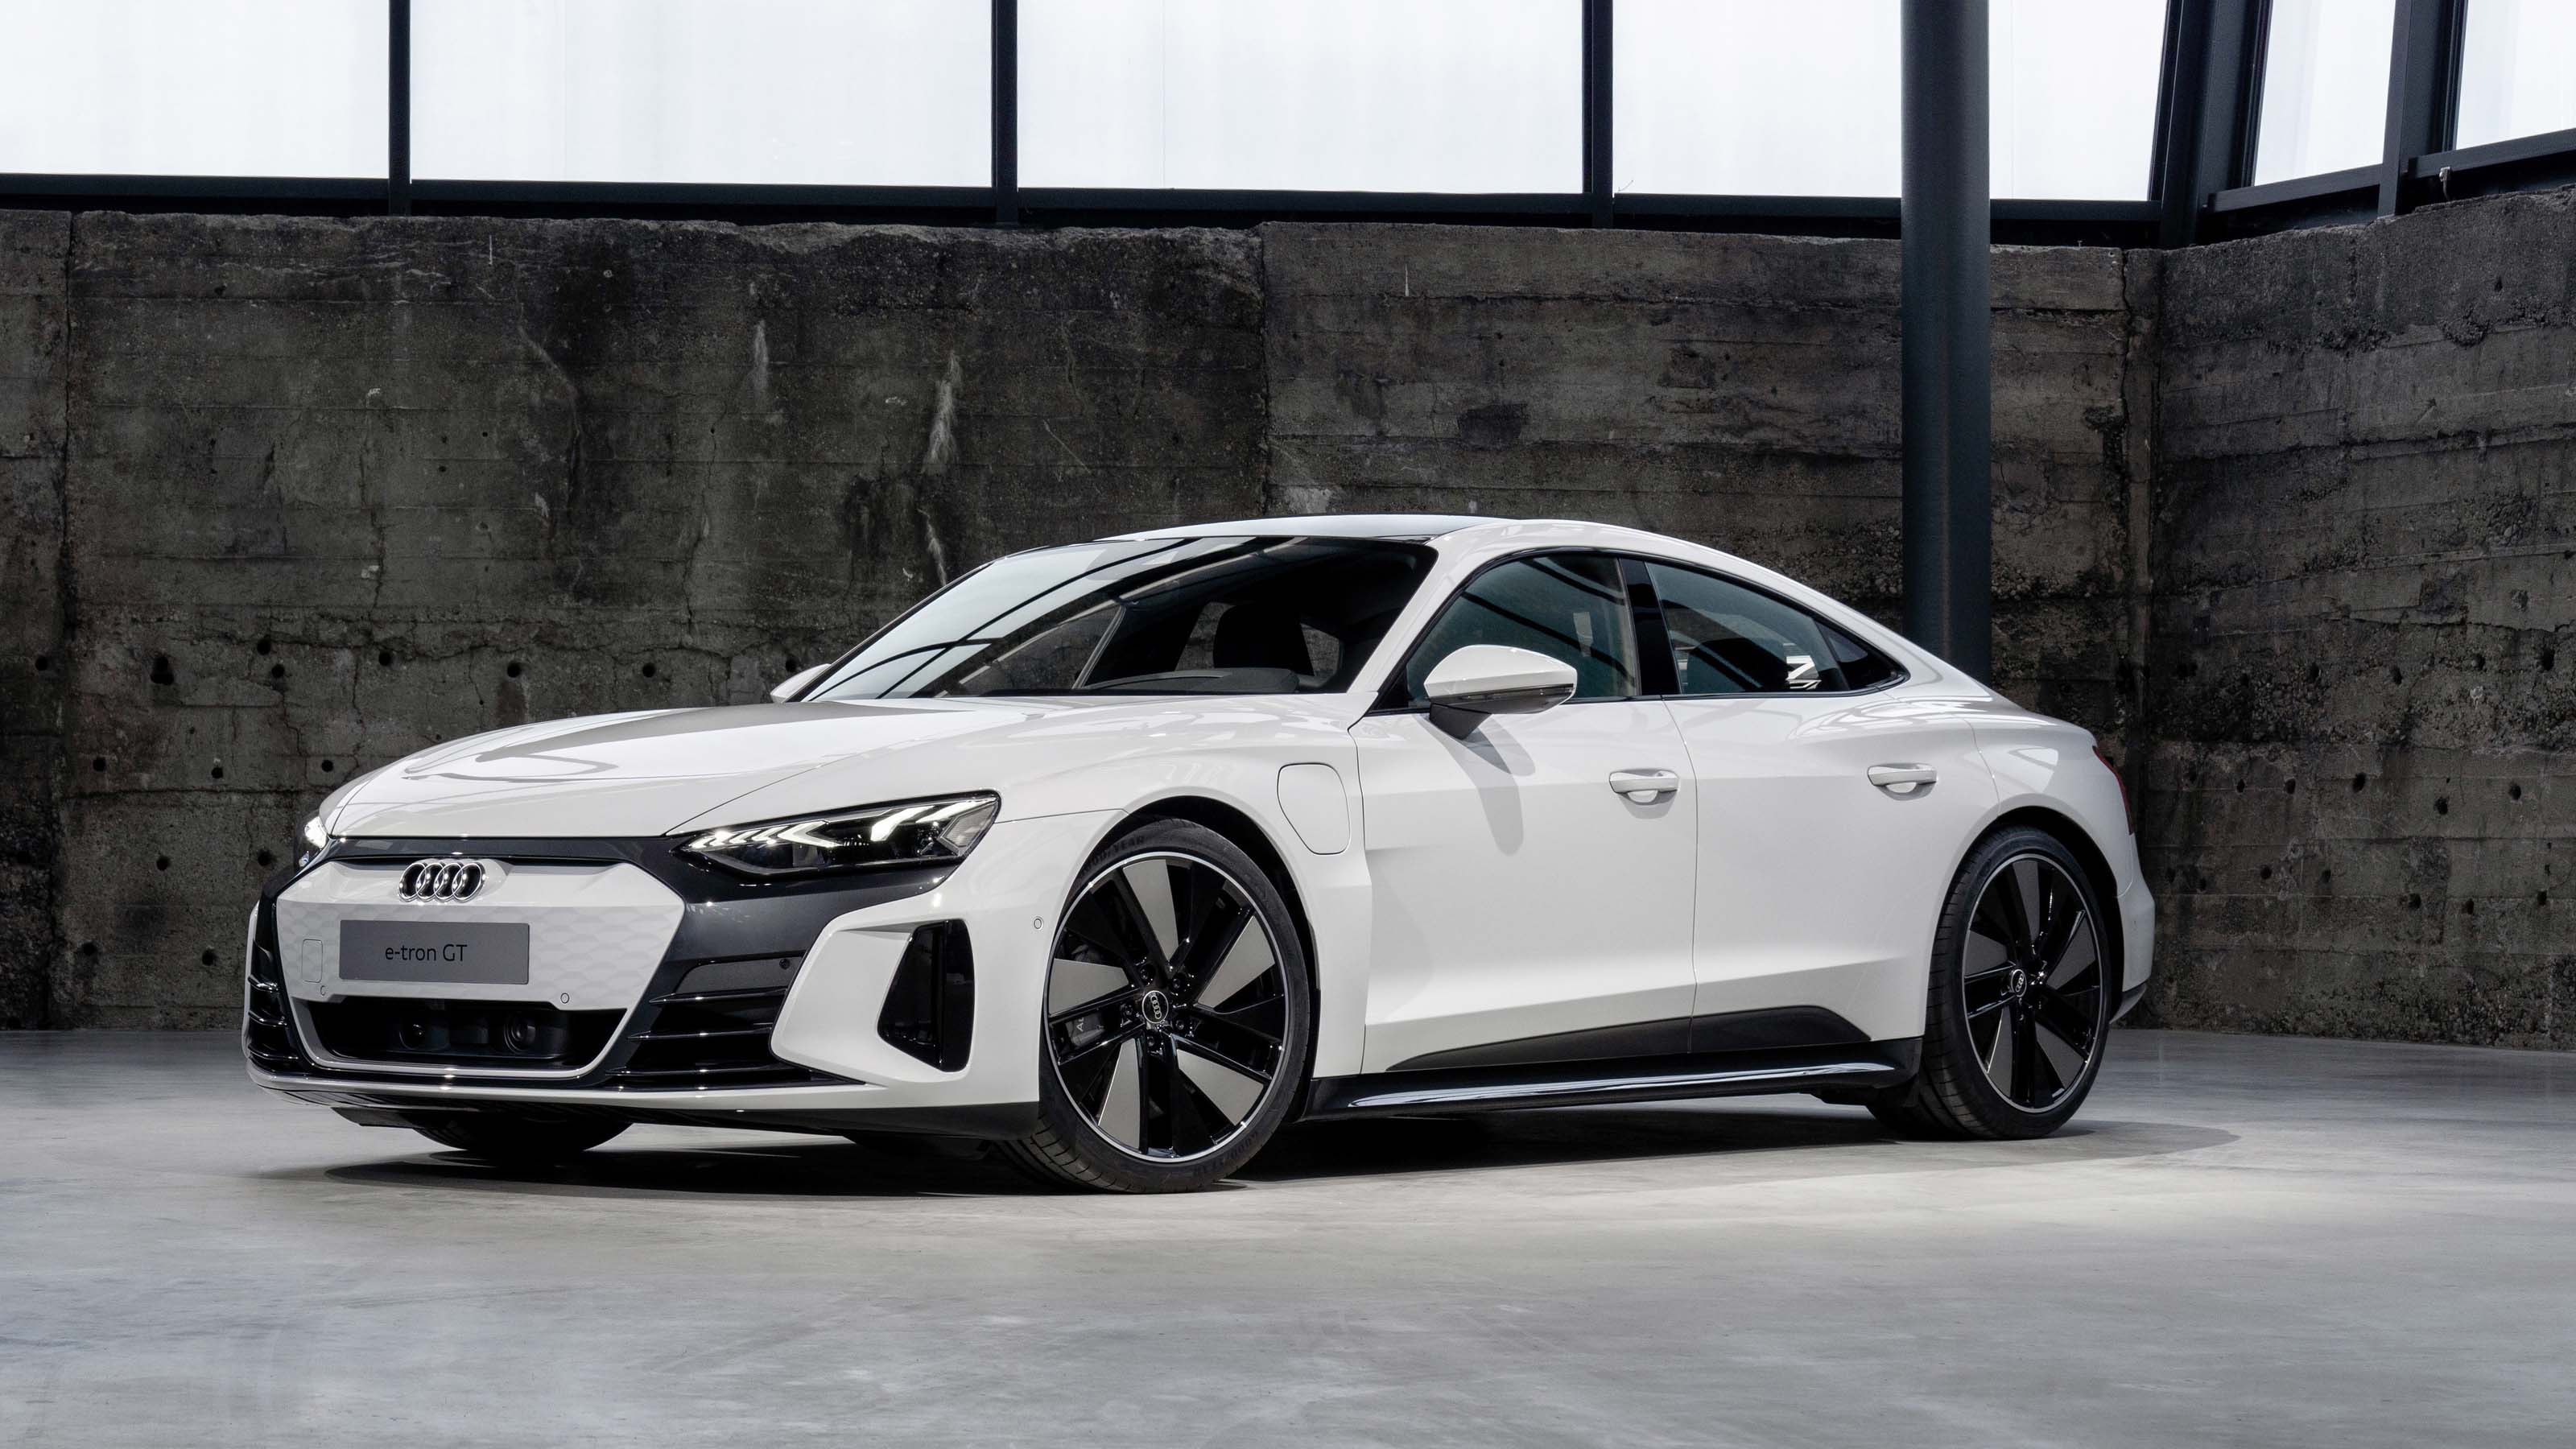 New pure-electric Audi RS e-tron GT launched with 637bhp